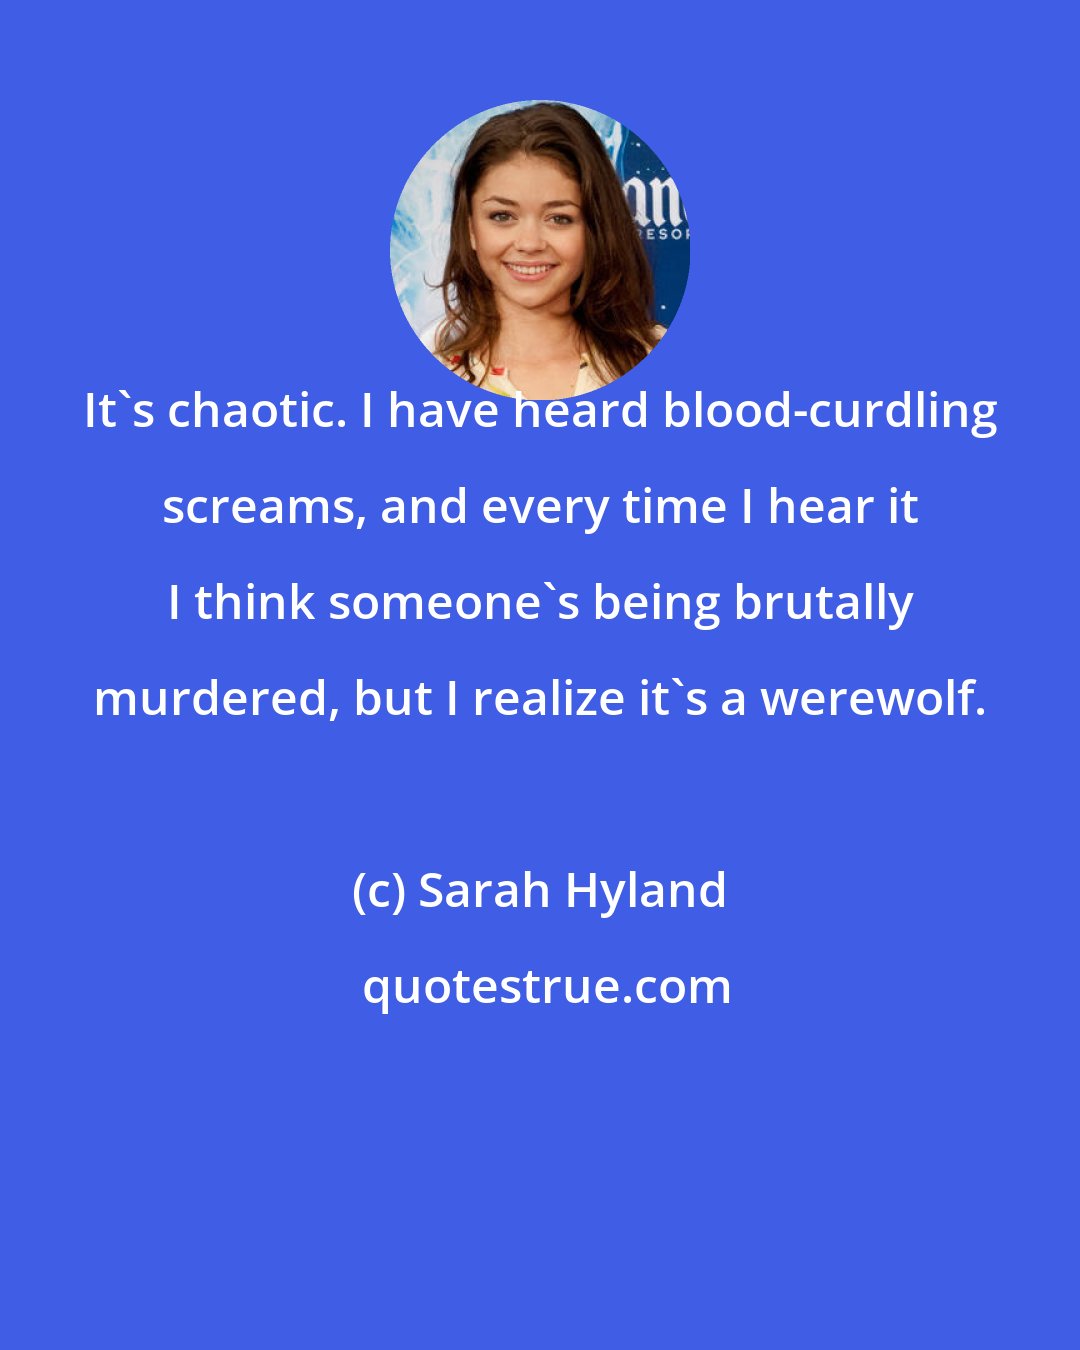 Sarah Hyland: It's chaotic. I have heard blood-curdling screams, and every time I hear it I think someone's being brutally murdered, but I realize it's a werewolf.